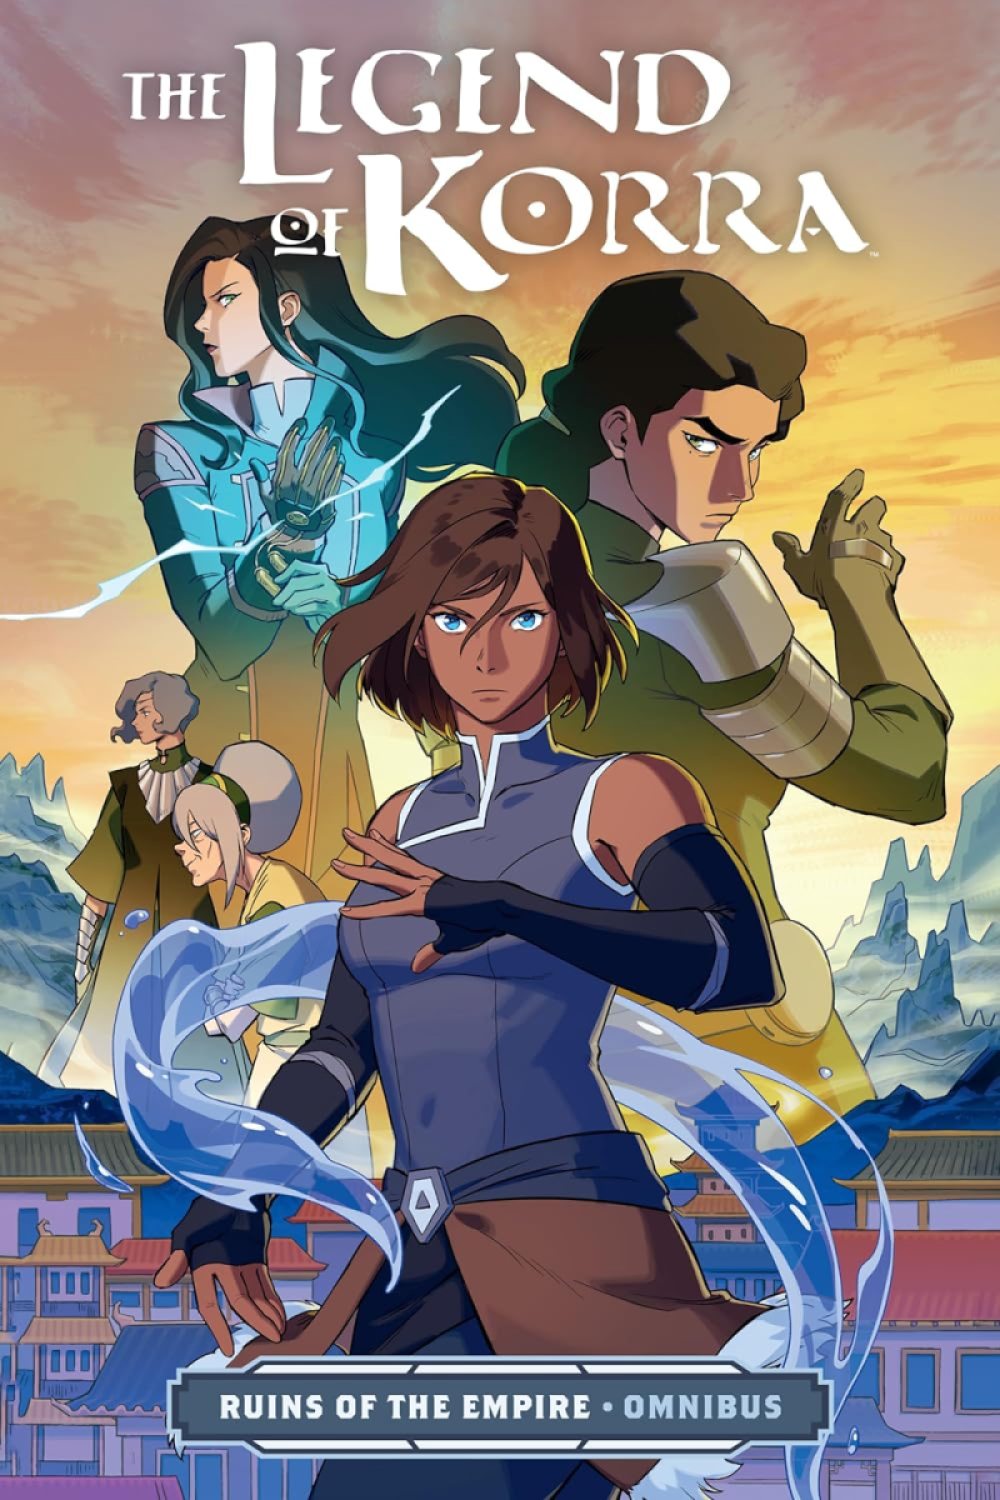 The Cover for The Legend of Korra: Ruins of the Empire, featuring Korra, Kuvira, Toph Beifong, and Asami